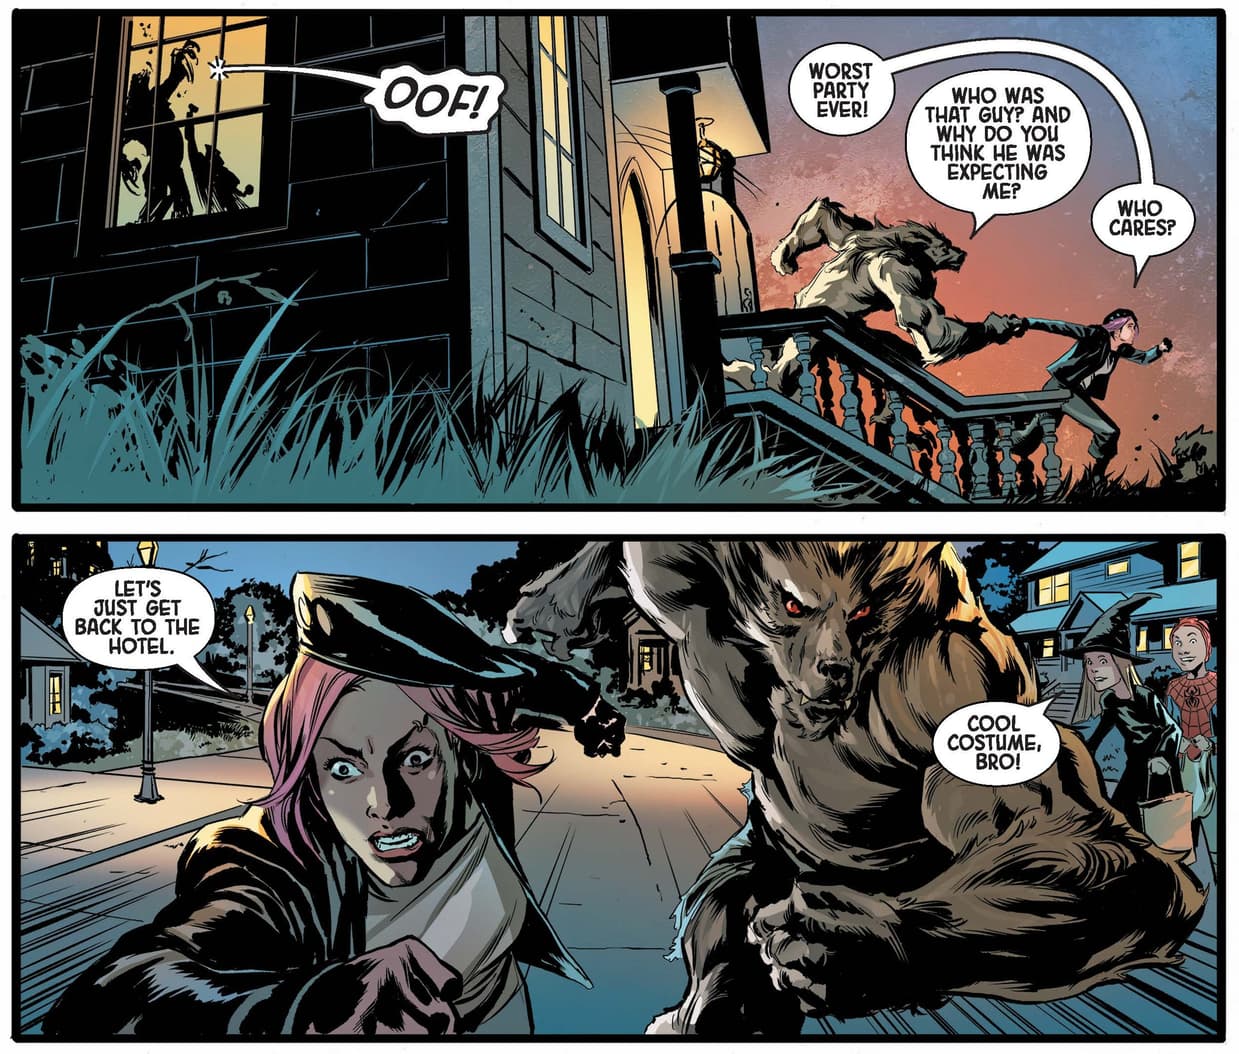 CRYPT OF SHADOWS (2022) #1: "Werewolf by Moon Knight" panels by Rebecca Roanhorse and Geoff Shaw